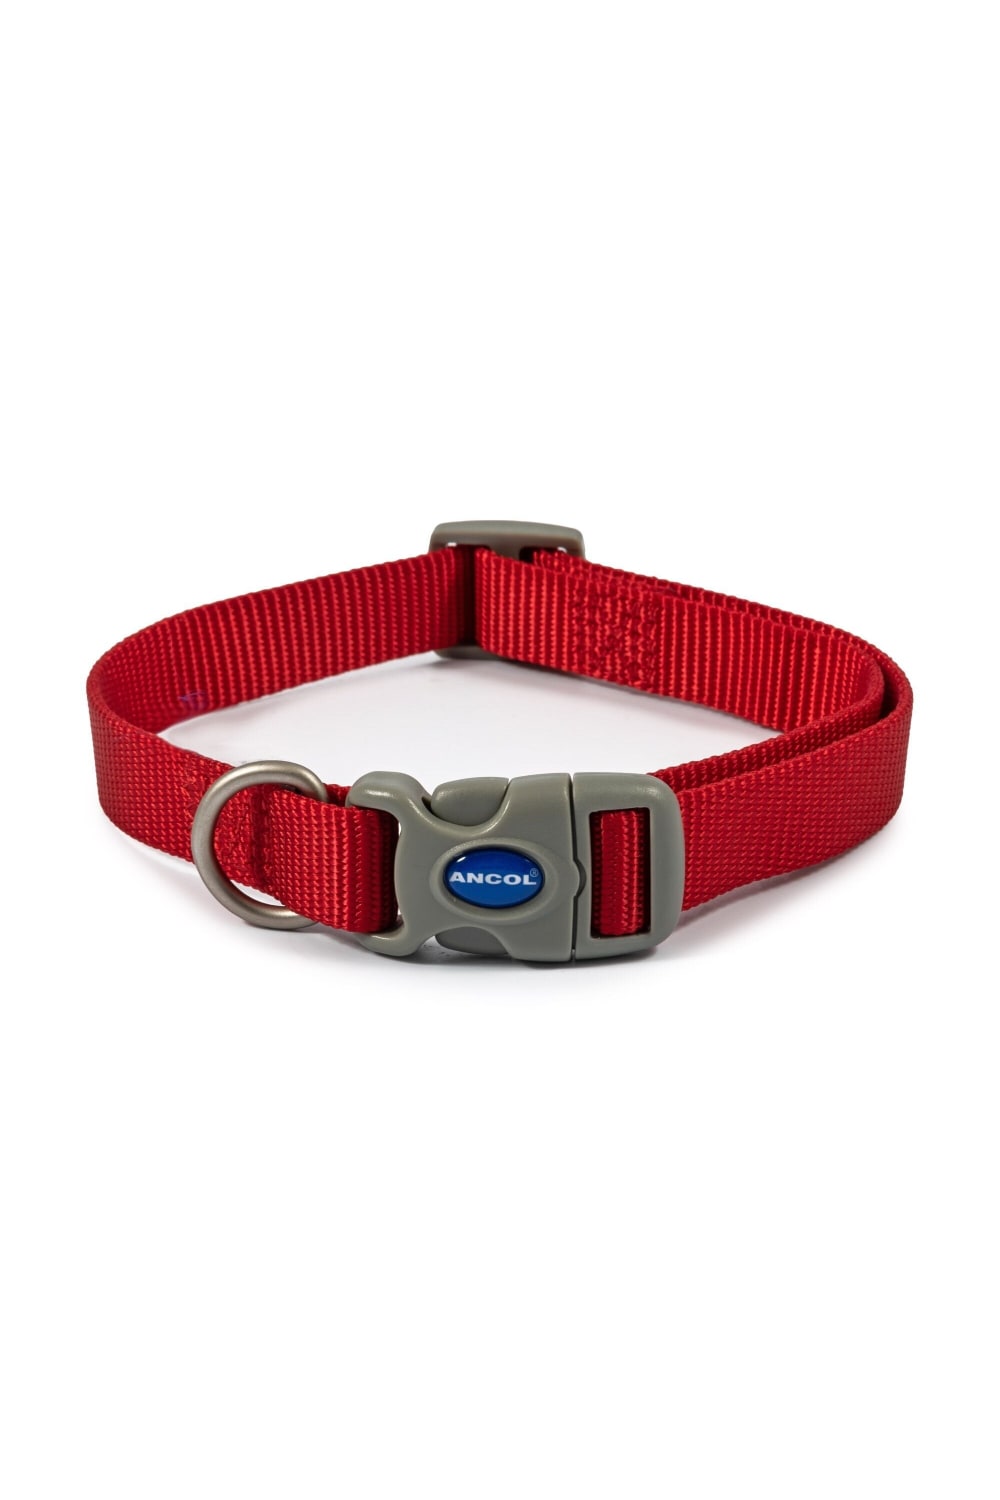 Ancol Viva Adjustable Dog Collar (Red) (17.72in - 27.56in)